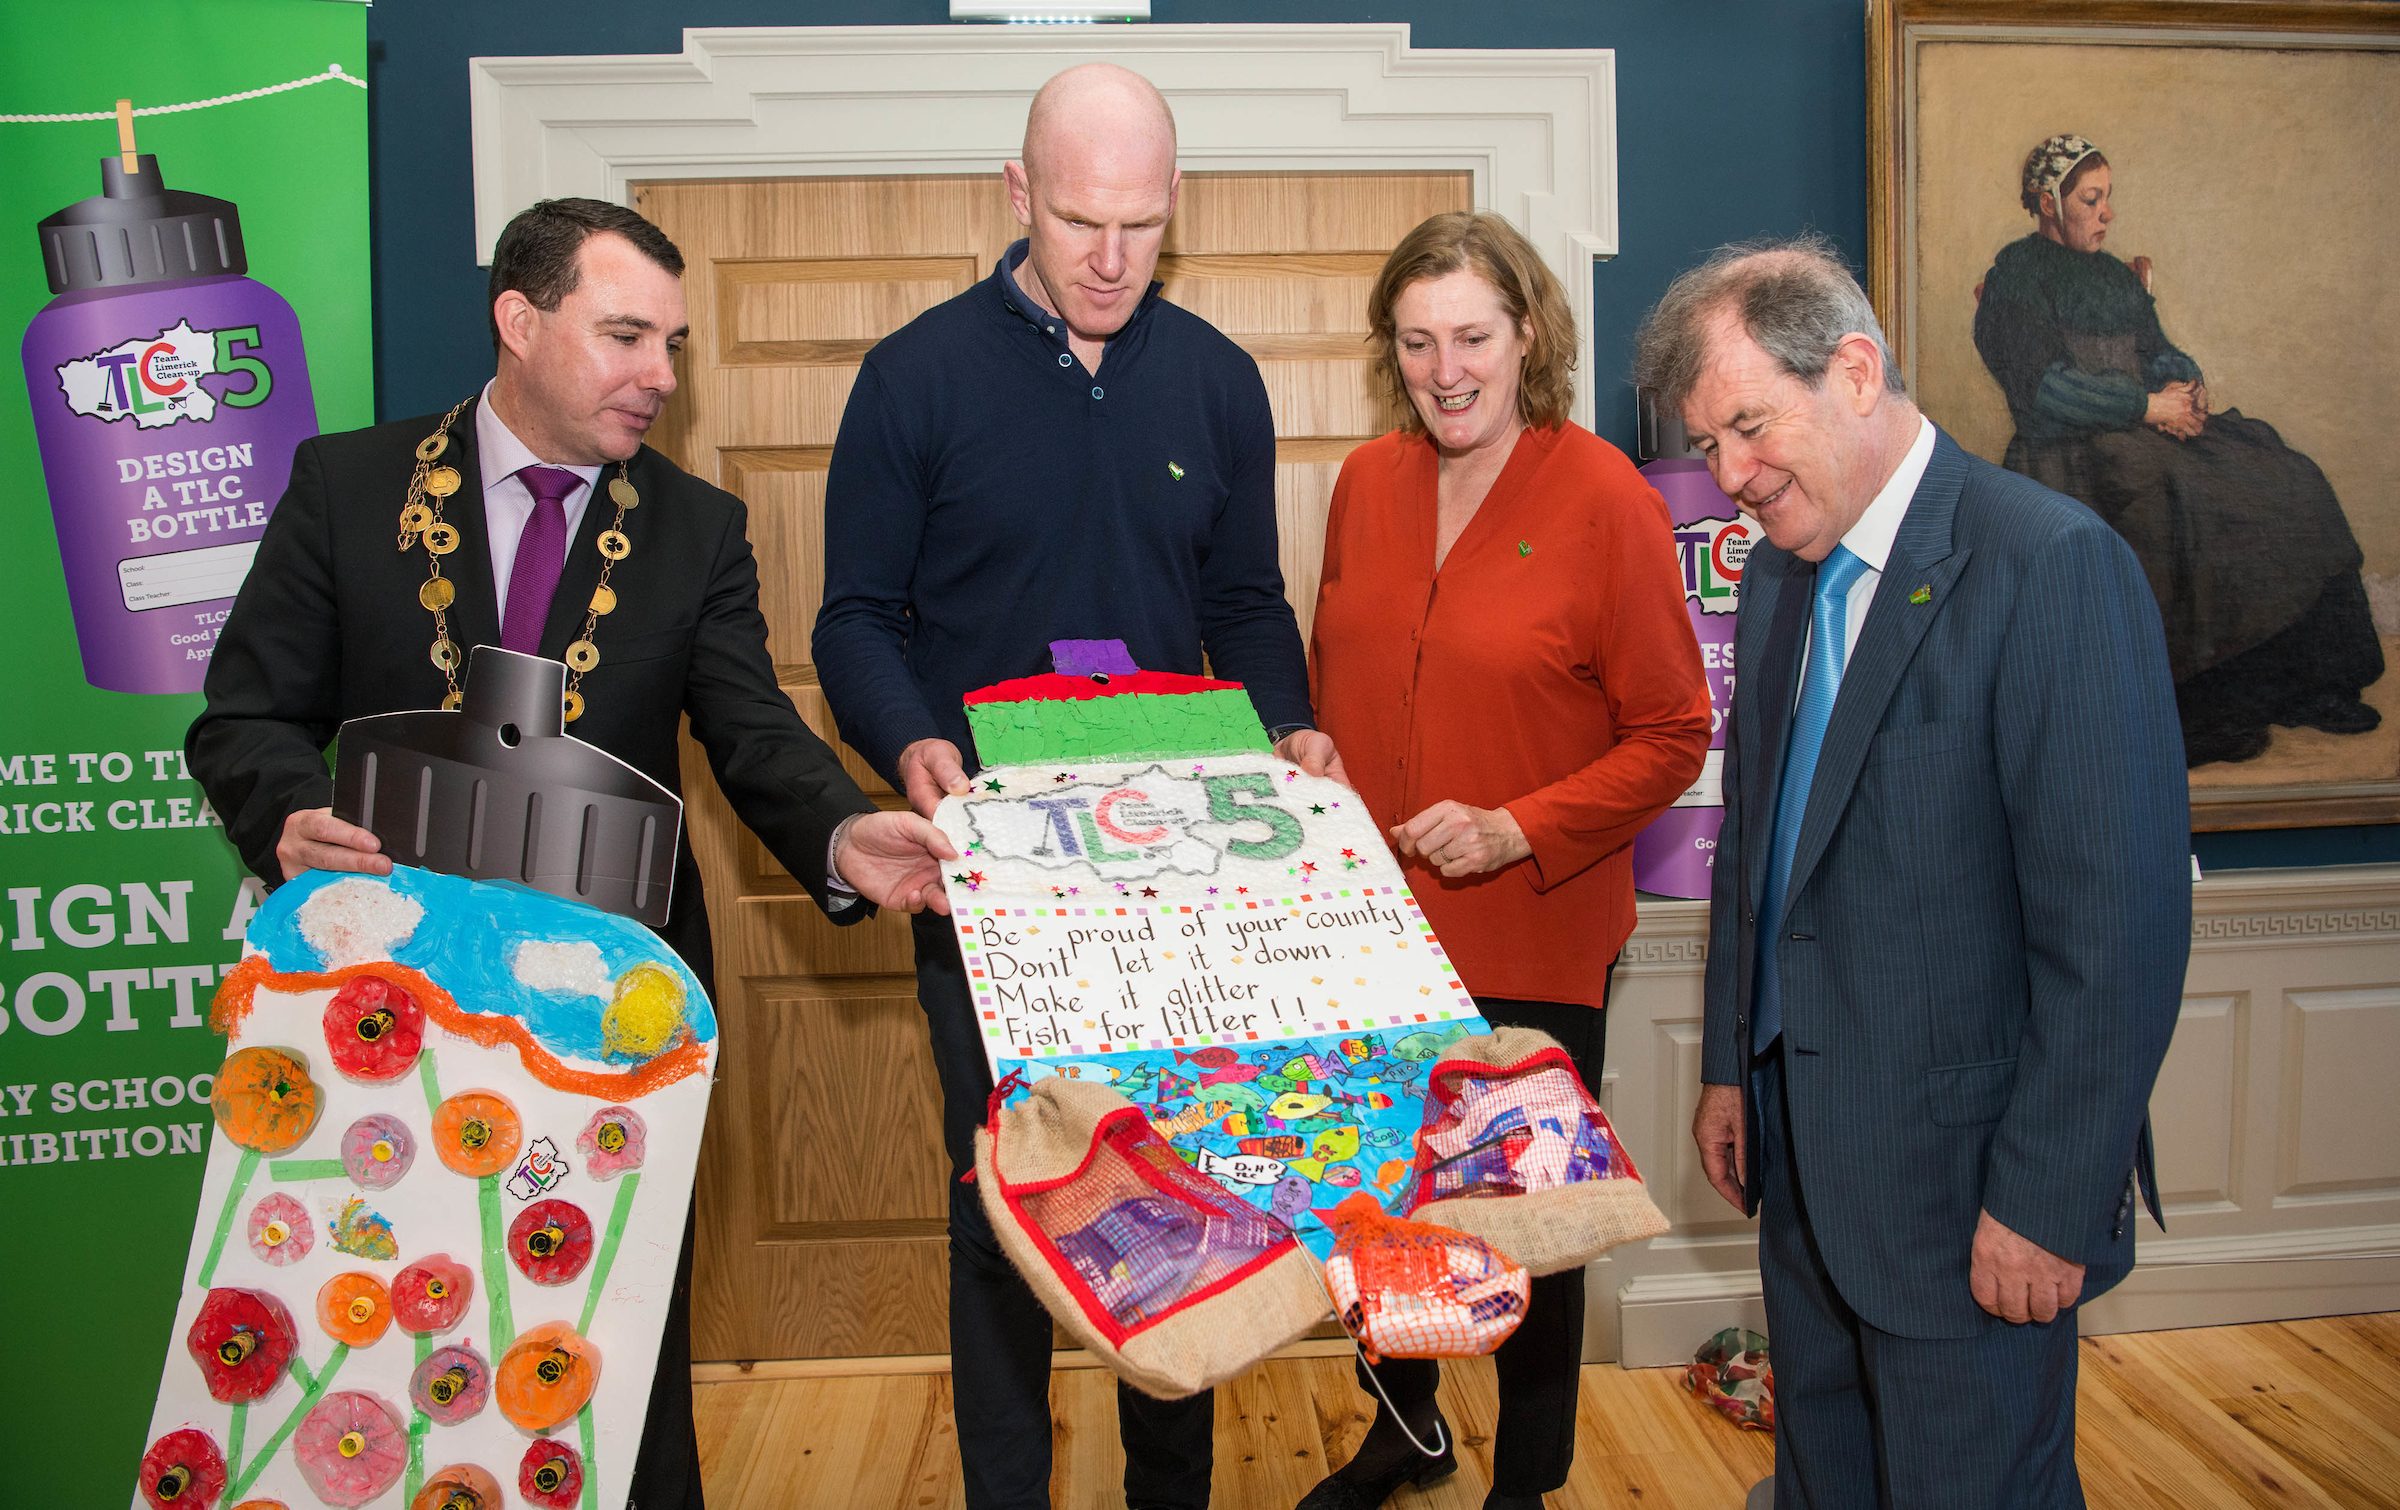 07/03/2019Mayor of Limerick City and County, Cllr James Collins, Paul O'Connell, Helen O'Donnell and JP McManus look closely at a poster design by 6th class students from Knocklong NS today at the 'Design a TLC Bottle' prizegiving at the Hunt Museum, Limerick. Over 50 primary schools across the county entered ahead of Team Limerick Clean-Up 5, which will see thousands of volunteers take to the streets of Limerick city and county for Europe's largest one-day clean up. Sponsored by the JP McManus Benevolent Fund, the event has seen over 360 tonnes of litter gathered from the streets since inception in 2015. Over 14,000 volunteers have already signed up for the 2019 event, taking place on Good Friday, 19th April. Photo by Diarmuid Greene